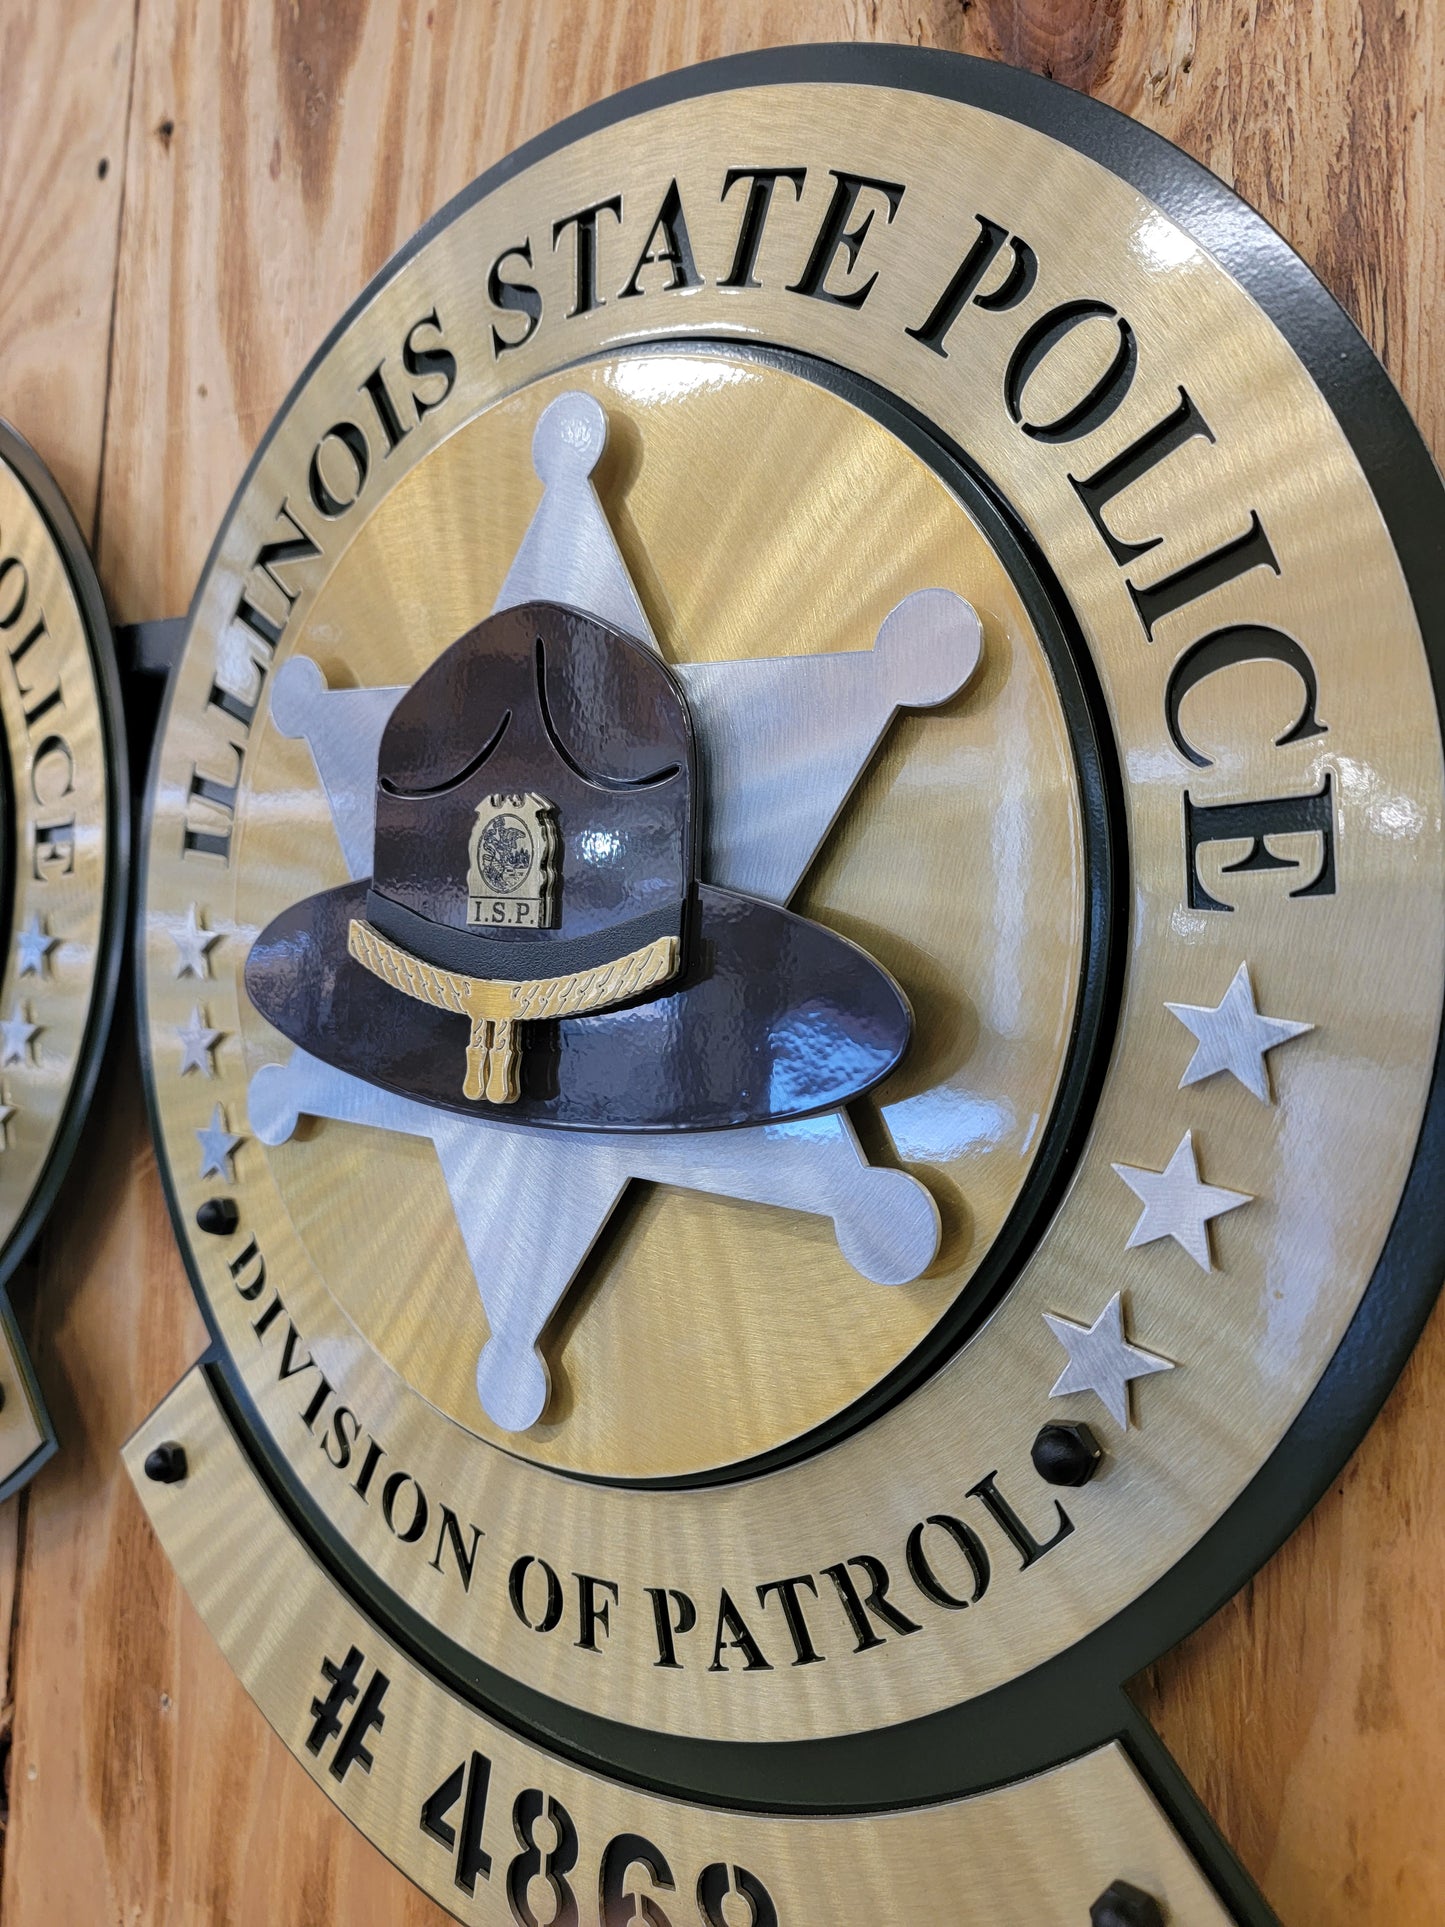 Illinois State Police Division Of Patrol